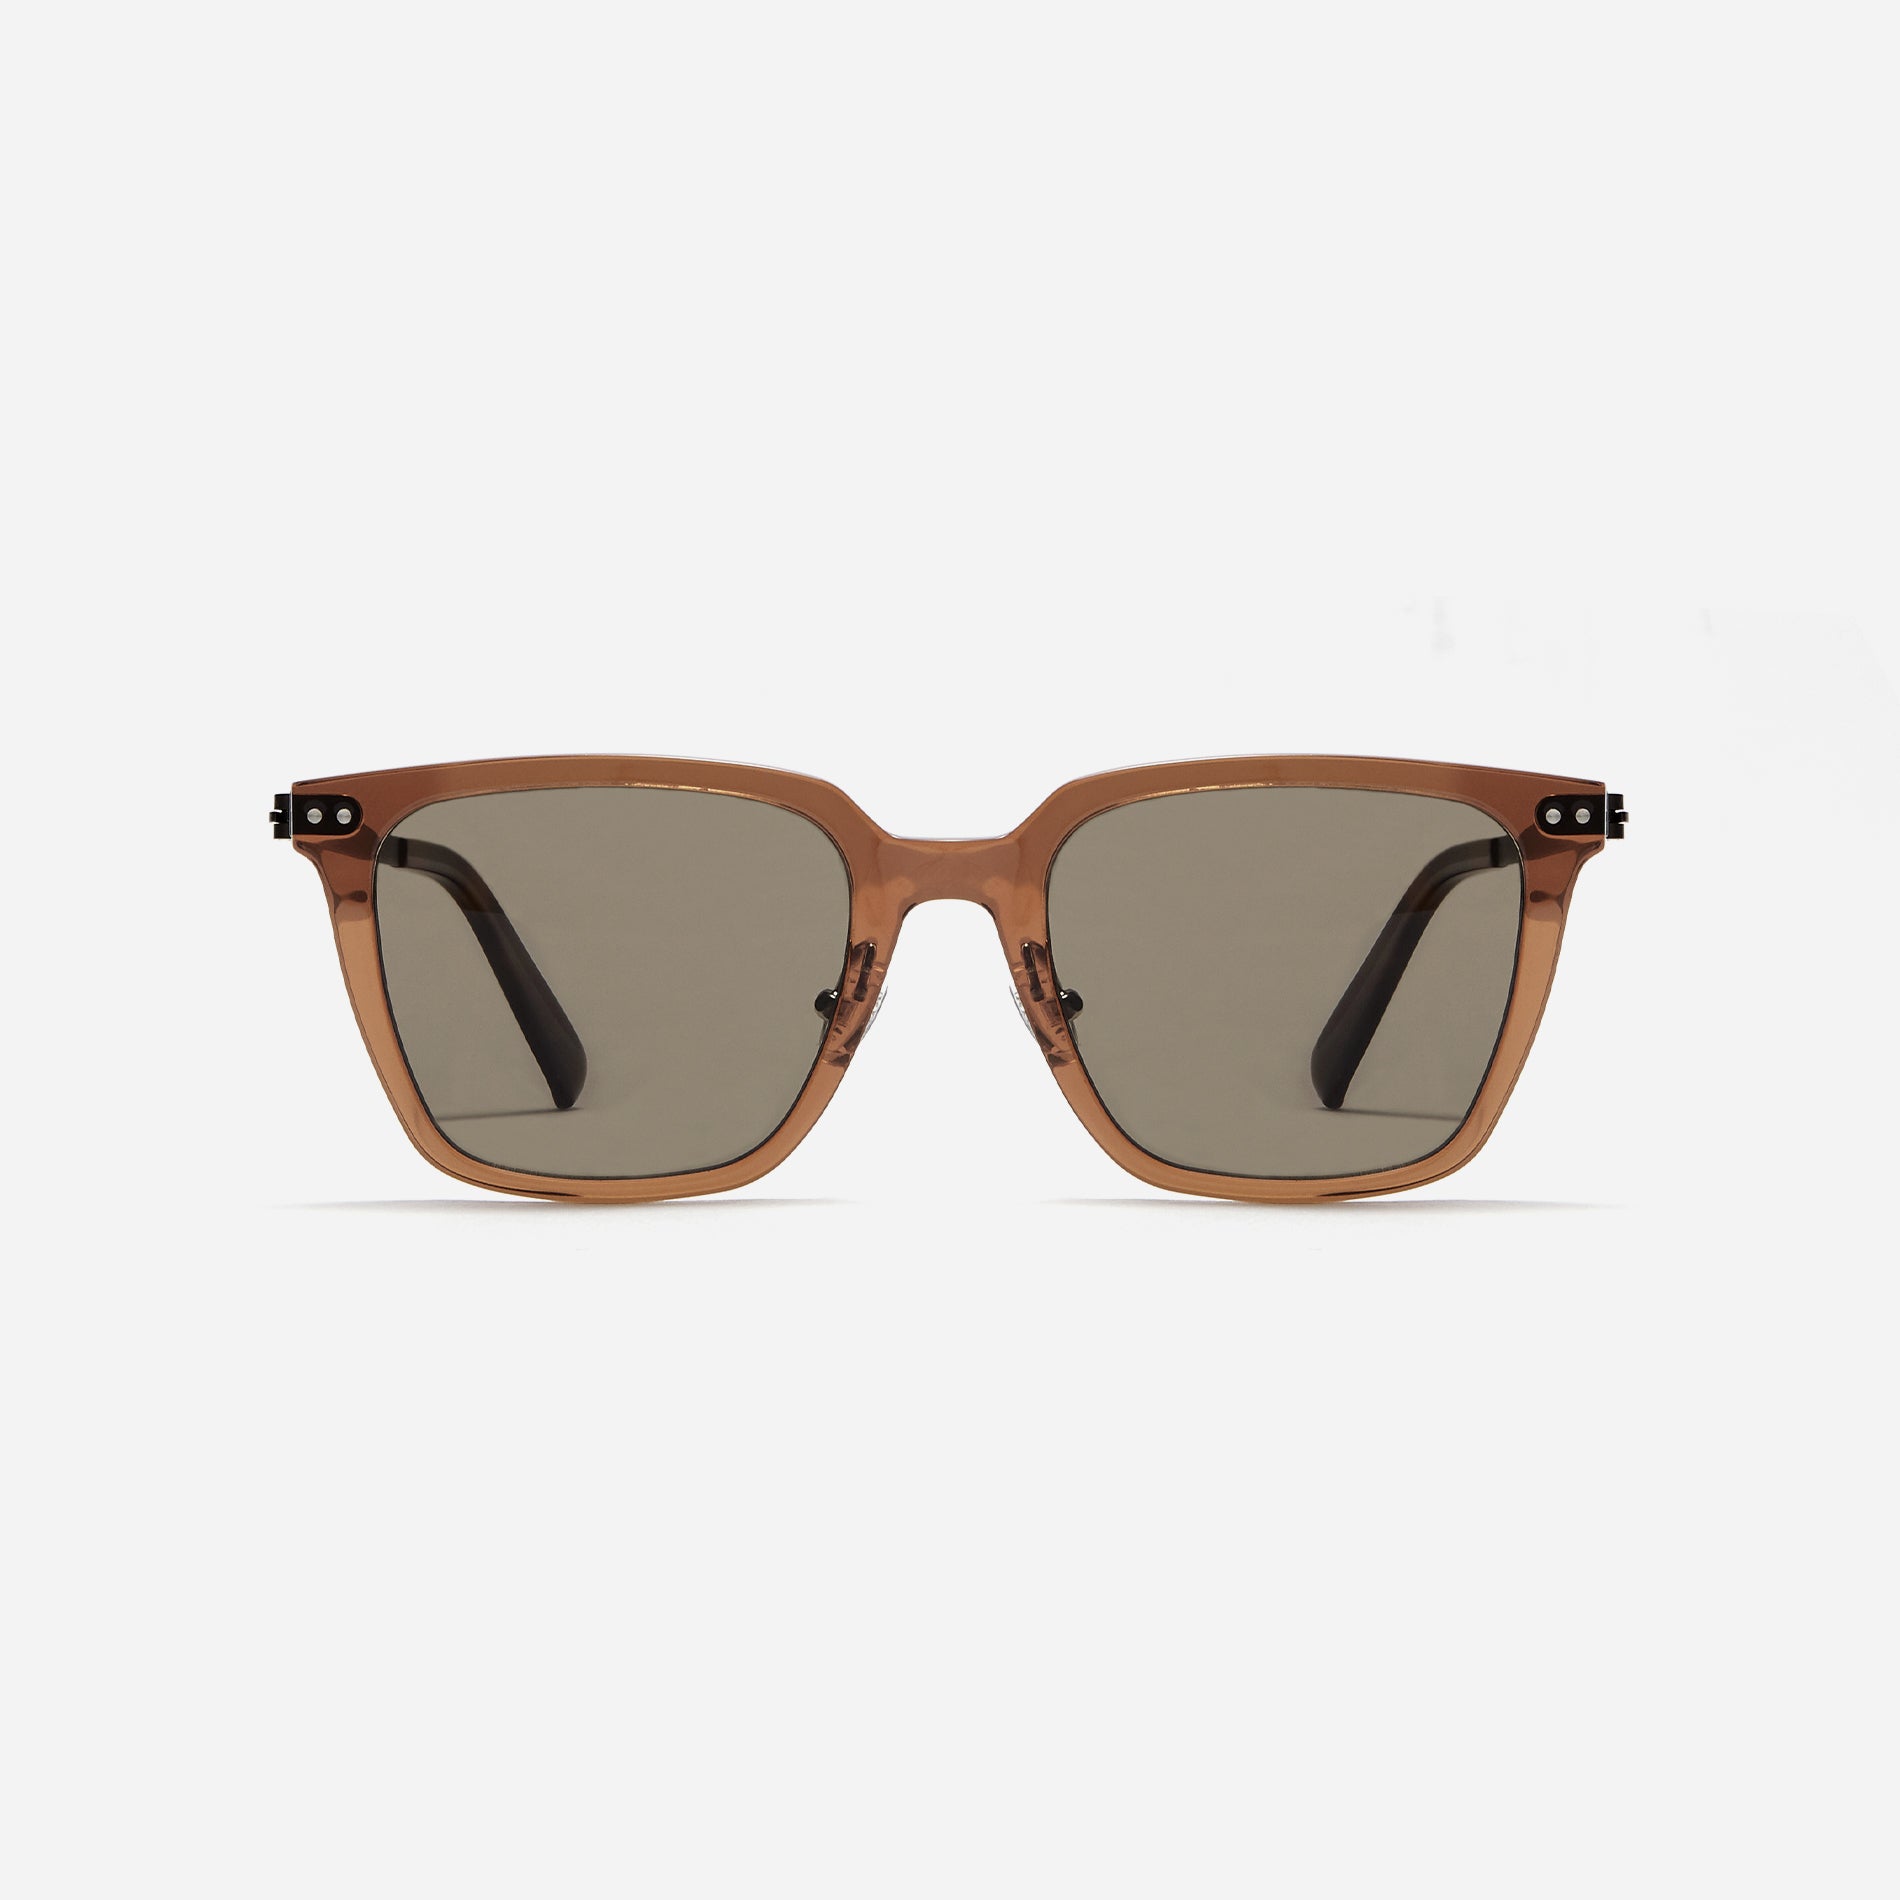 Square-shaped polarized sunglasses, representing CARIN’s POLARIZED line. Crafted from lightweight and durable bio-plastic to prevent slipping.